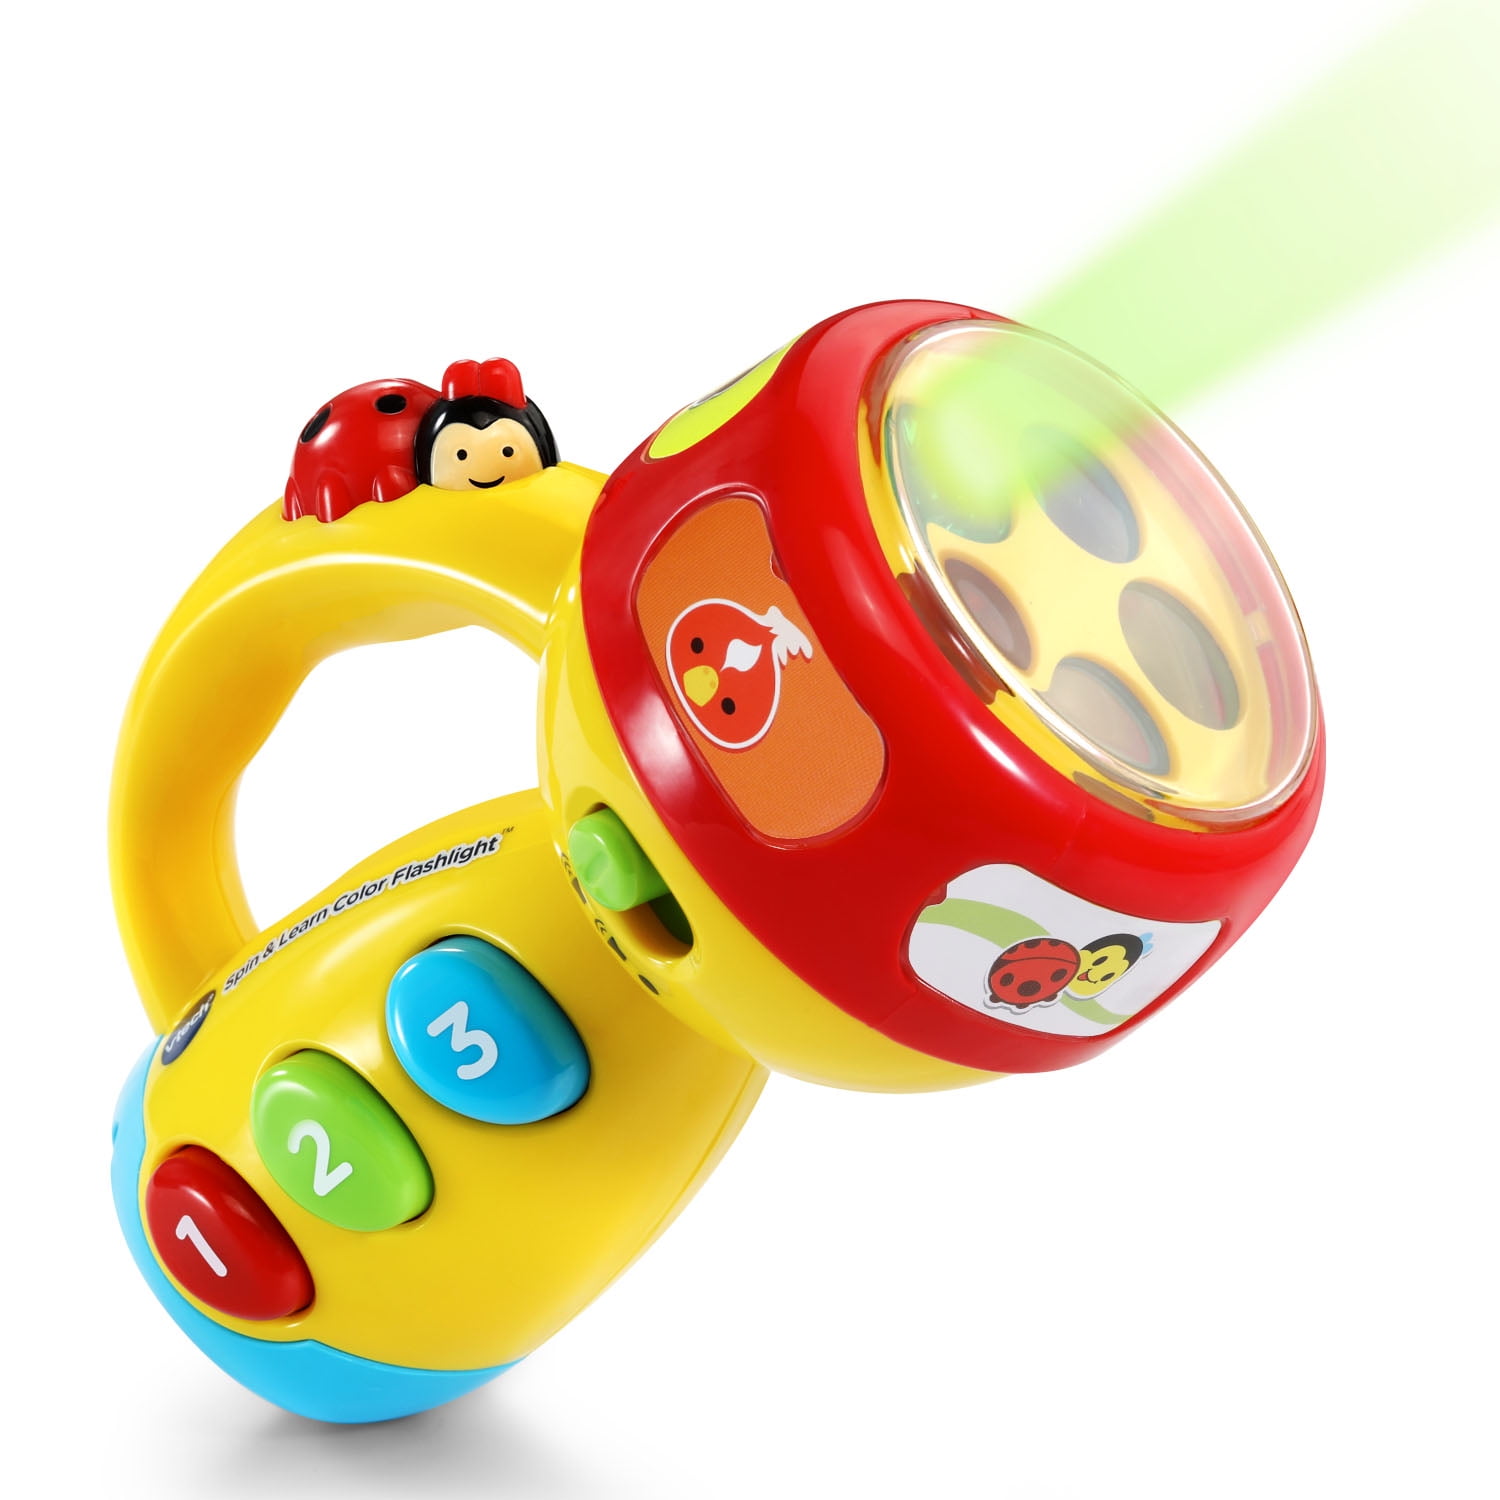 VTech Spin and Learn Color Flashlight Pink Online 885312928439 for sale online 